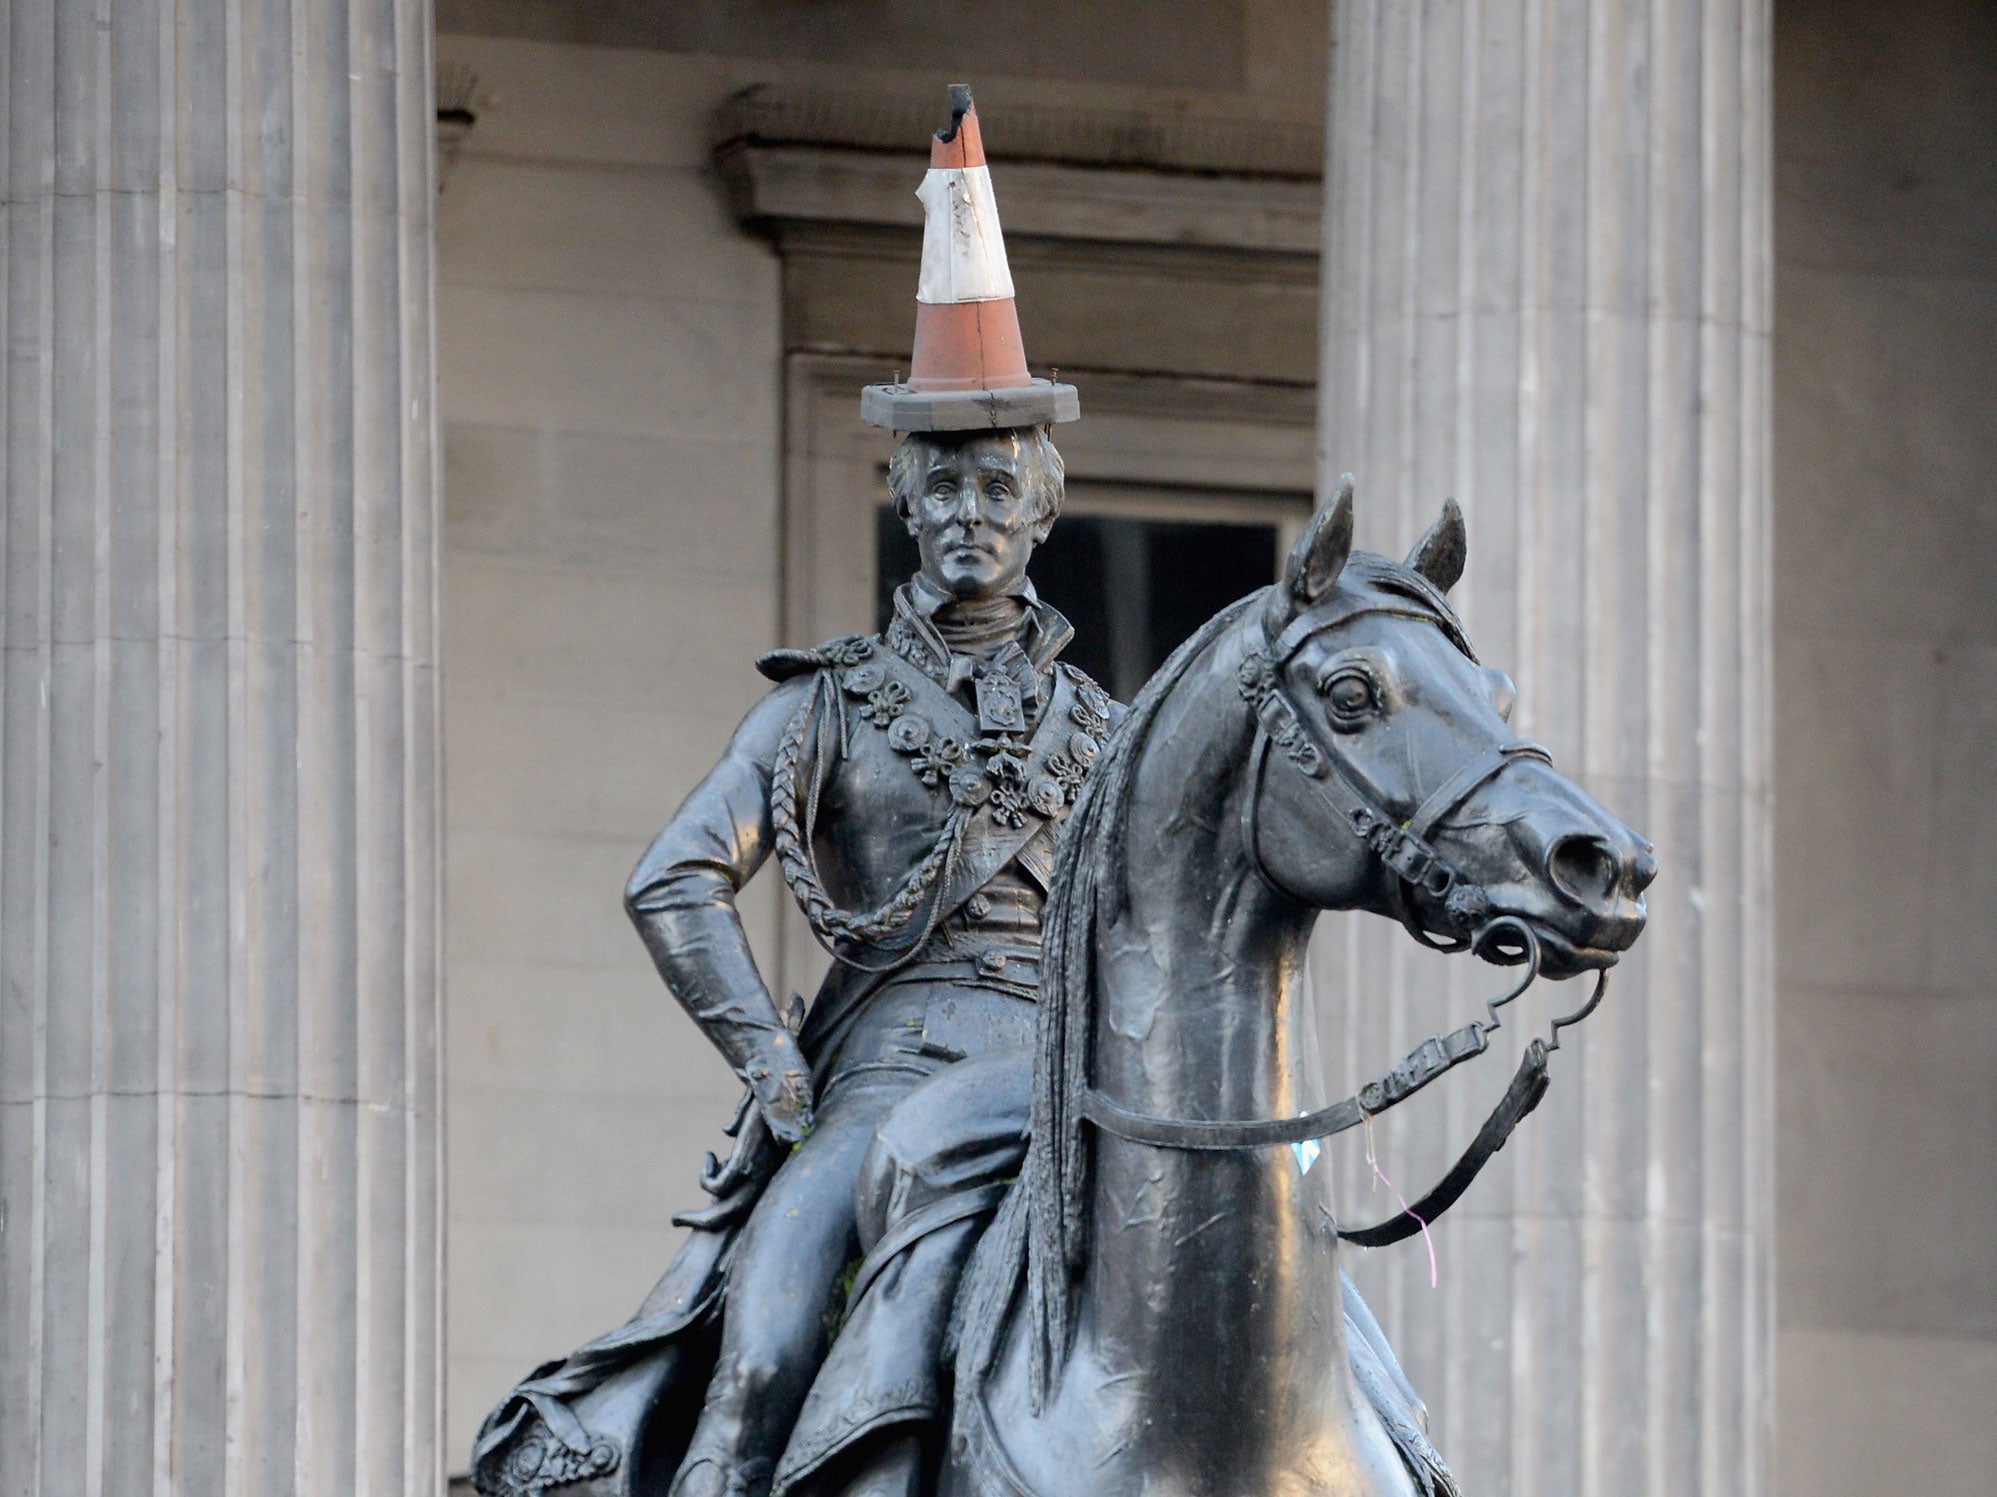 The Arches, like the hat-wearing Duke of Wellington statue, was a Glasgow legend.